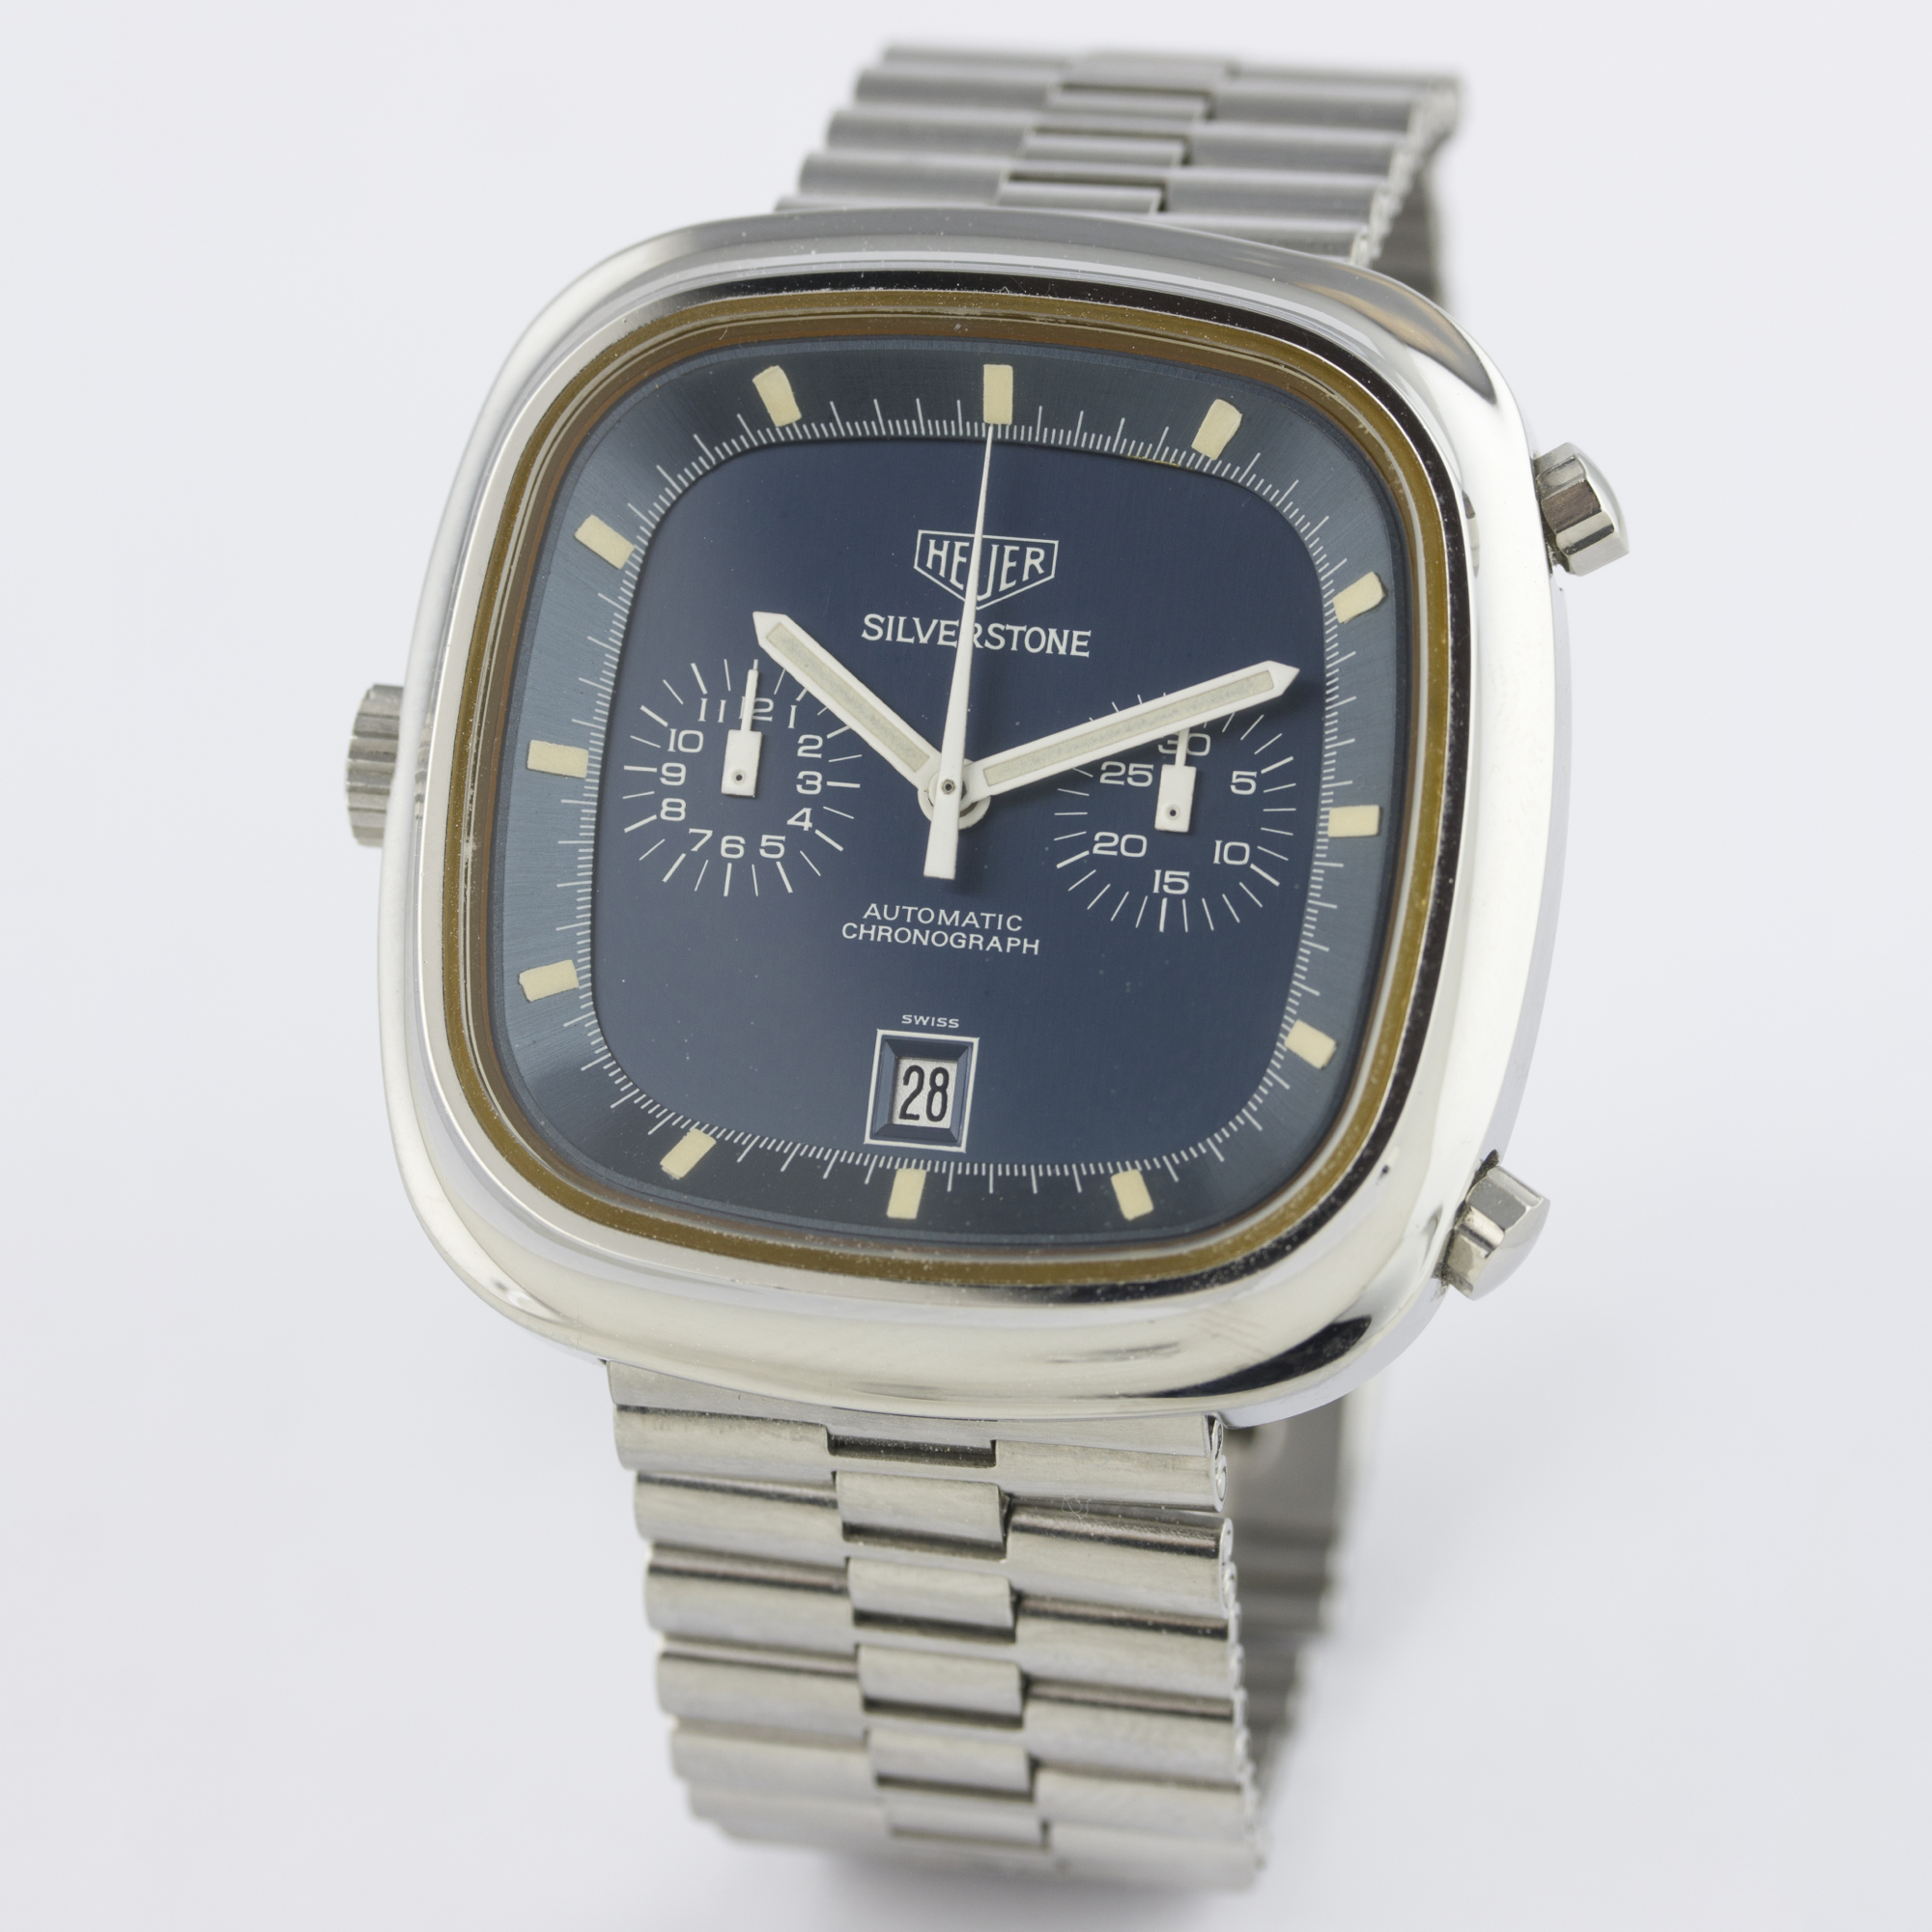 A RARE GENTLEMAN'S STAINLESS STEEL HEUER SILVERSTONE AUTOMATIC CHRONOGRAPH BRACELET WATCH CIRCA - Image 3 of 12